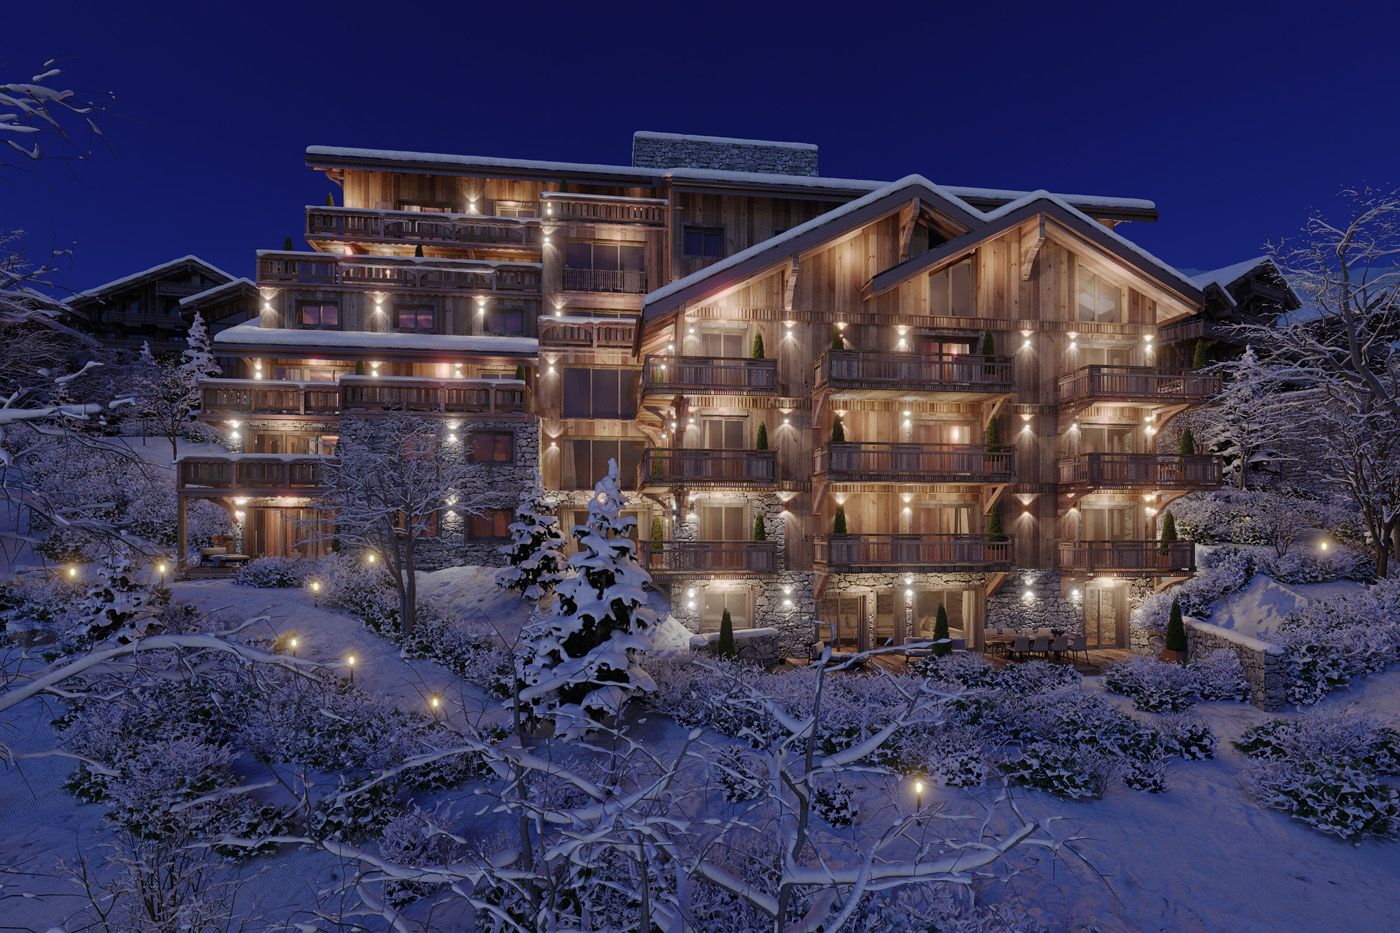 3 bed Apartment For Sale in Three Valleys, French Alps